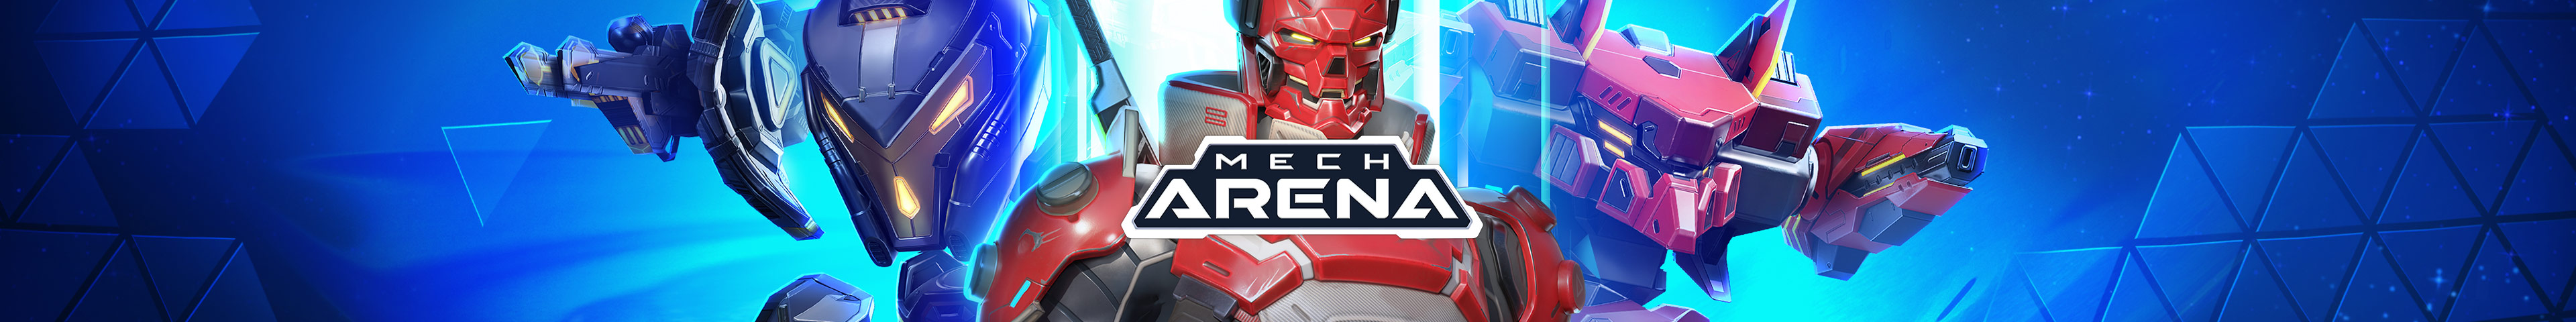 Black Friday is live in Mech Arena Store